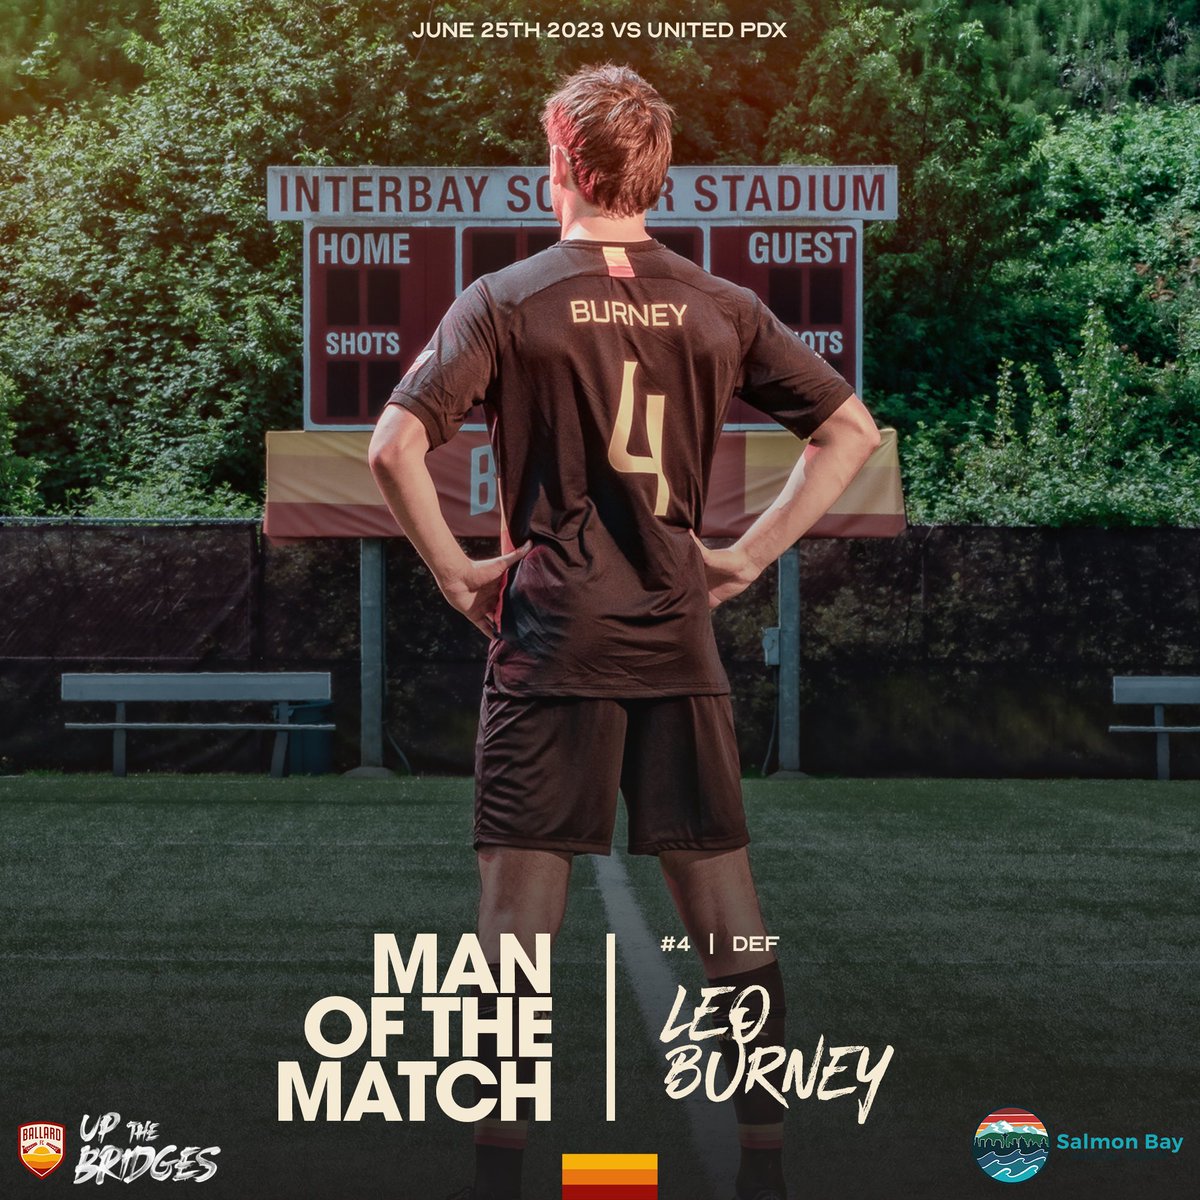 Down a man for over 70 minutes, and he kept the opposition at bay. Leo Burney is your Man of the Match!

📸: @GeoRittenmyer 

#BallardFC | #UpTheBridges